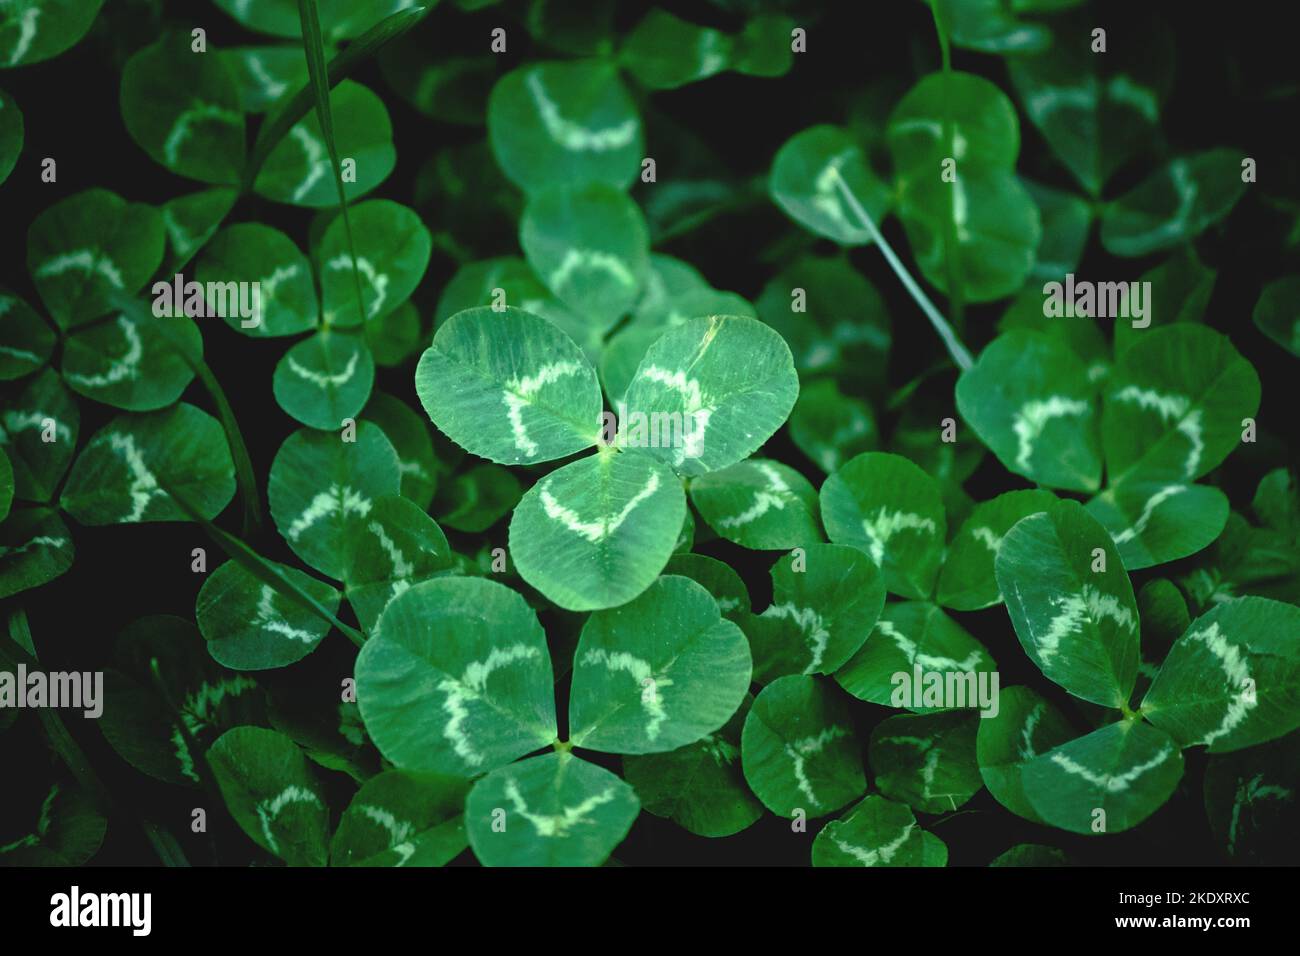 Leaf clover background, wallpaper. typical three leaf clover. Dark photo idea concept. St. Patricks Day holiday symbol. Top view, above. No people. Stock Photo